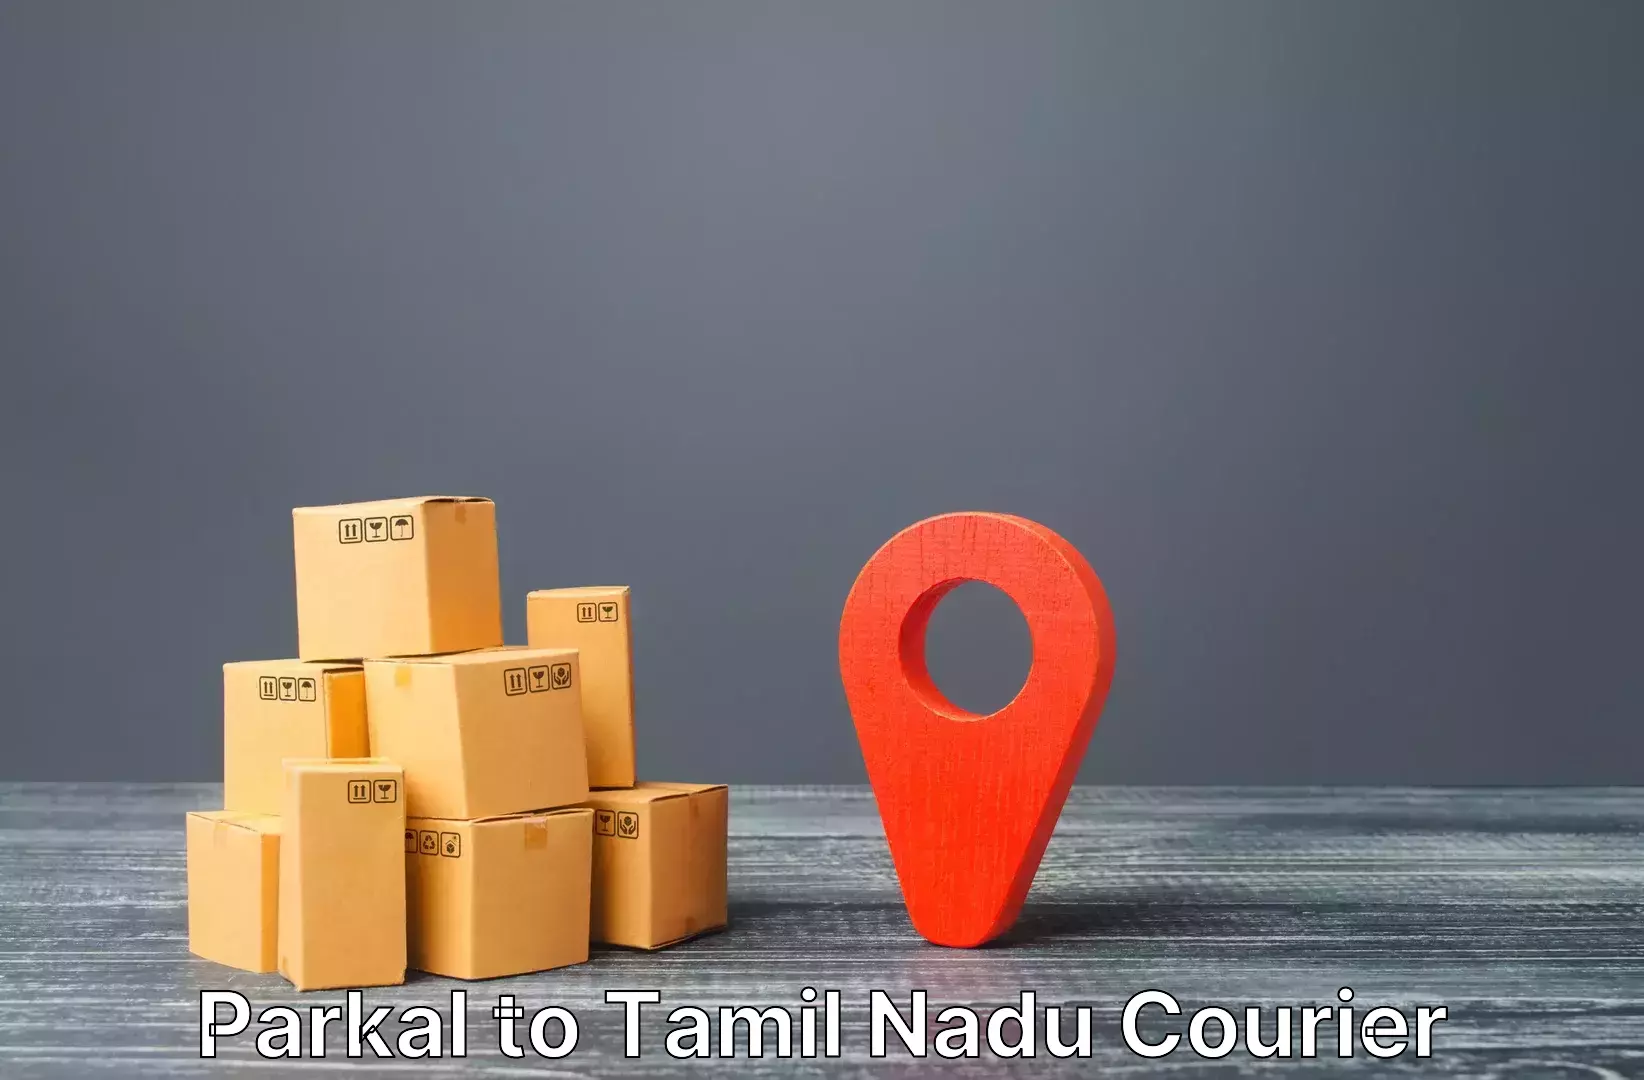 Luggage transport service Parkal to Mylapore